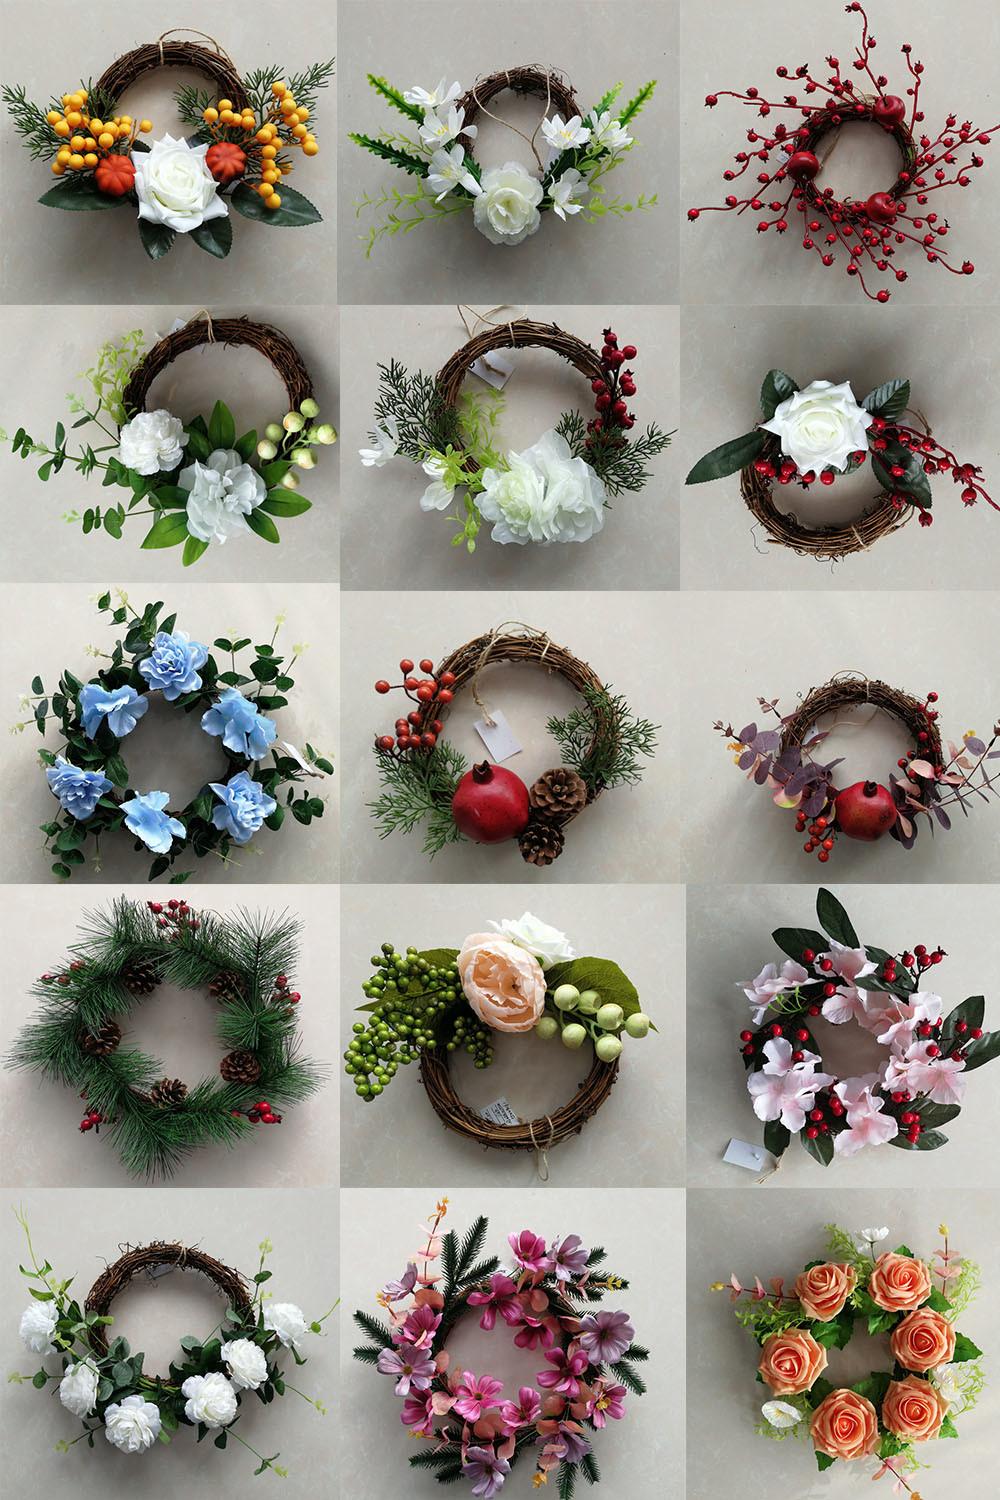 New Attractive Garland Hot Sale Artificial Christmas Flower Wreath Door and Wall Decoration Christmas Tree Hanging Ornament Christmas Wreath Decoration